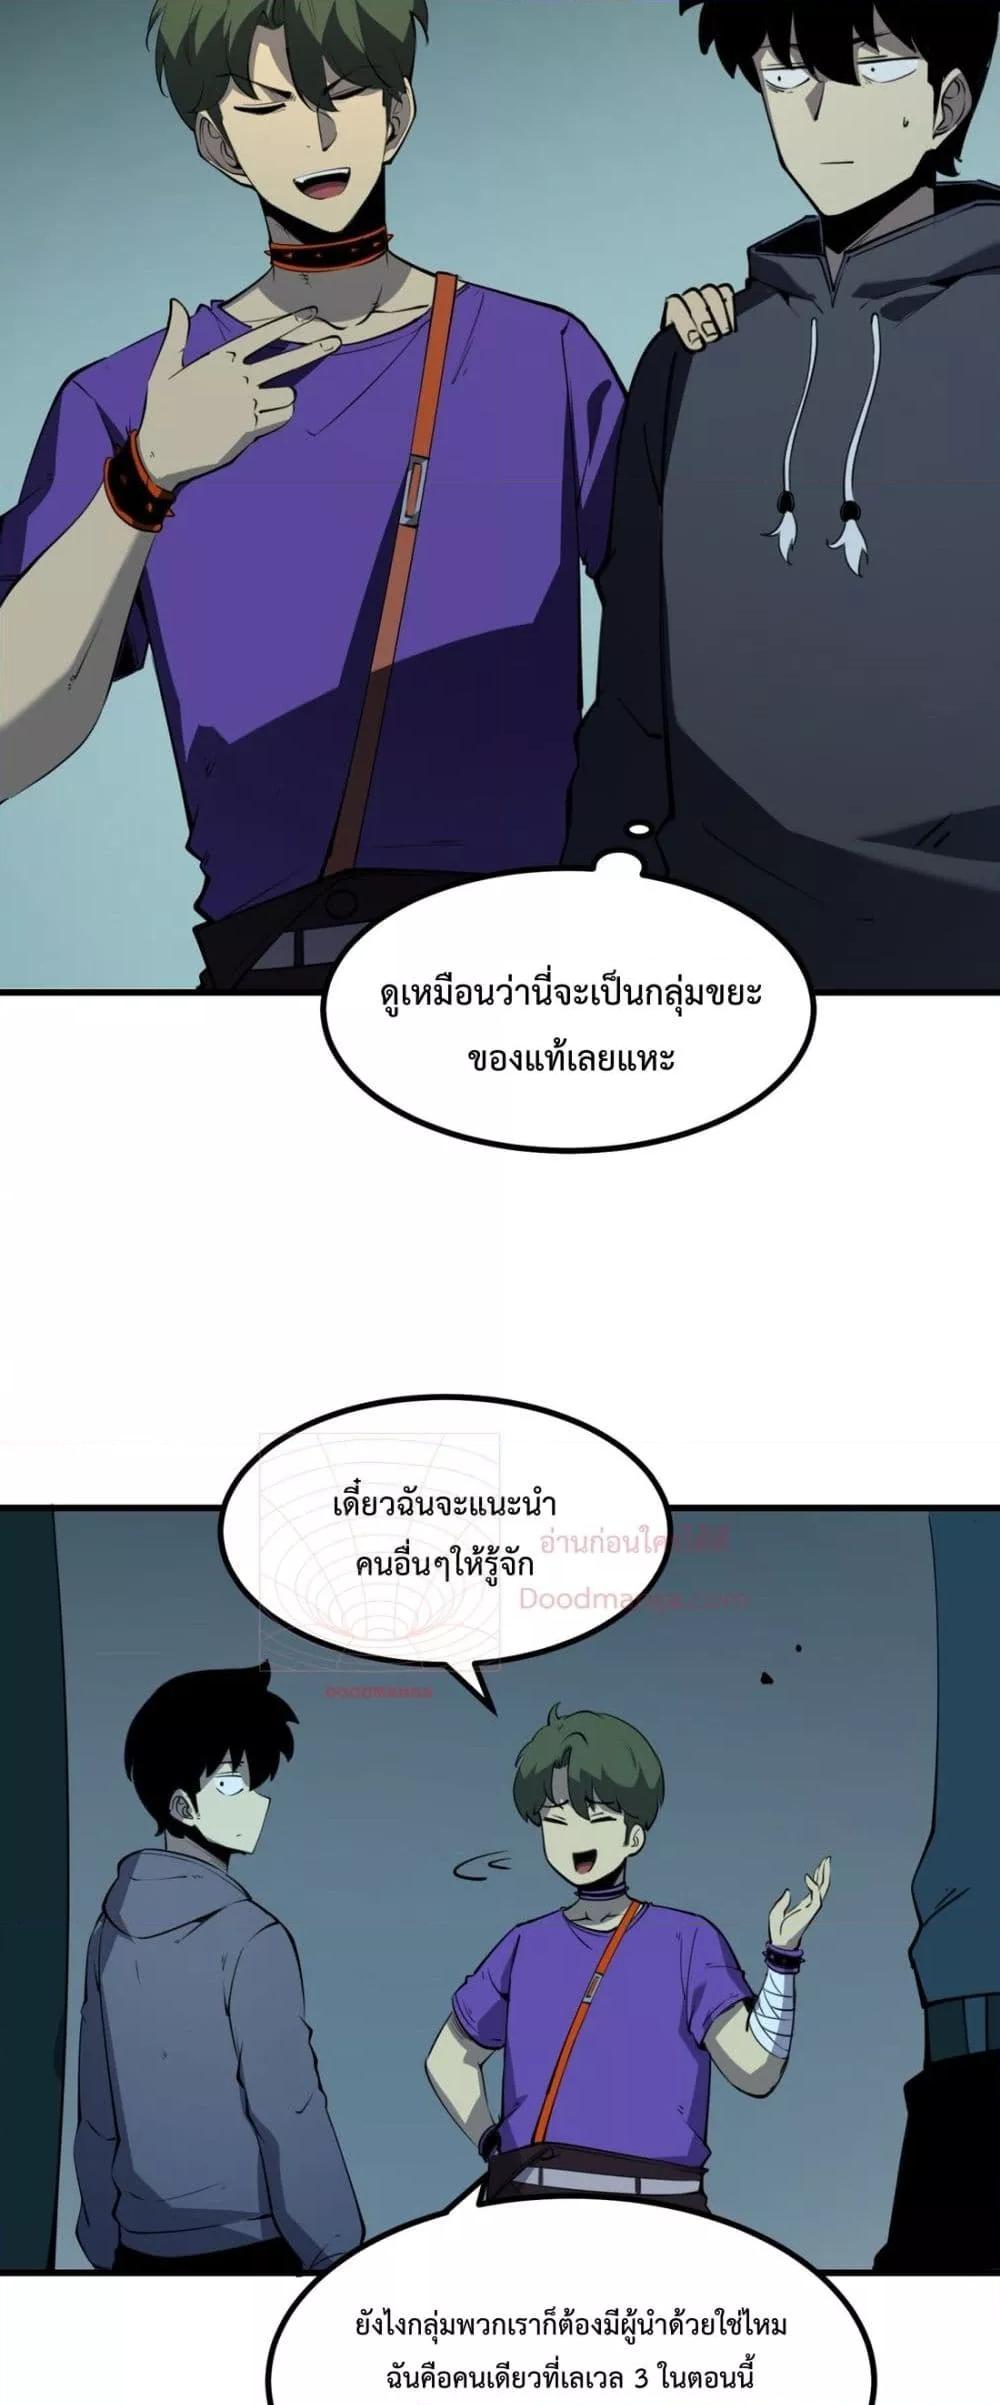 I Became The King by Scavenging โ€“ เนเธเนเธฅเน เน€เธฅเน€เธงเนเธฅเธฅเธฃเธดเนเธ เธ•เธญเธเธ—เธตเน 12 (5)